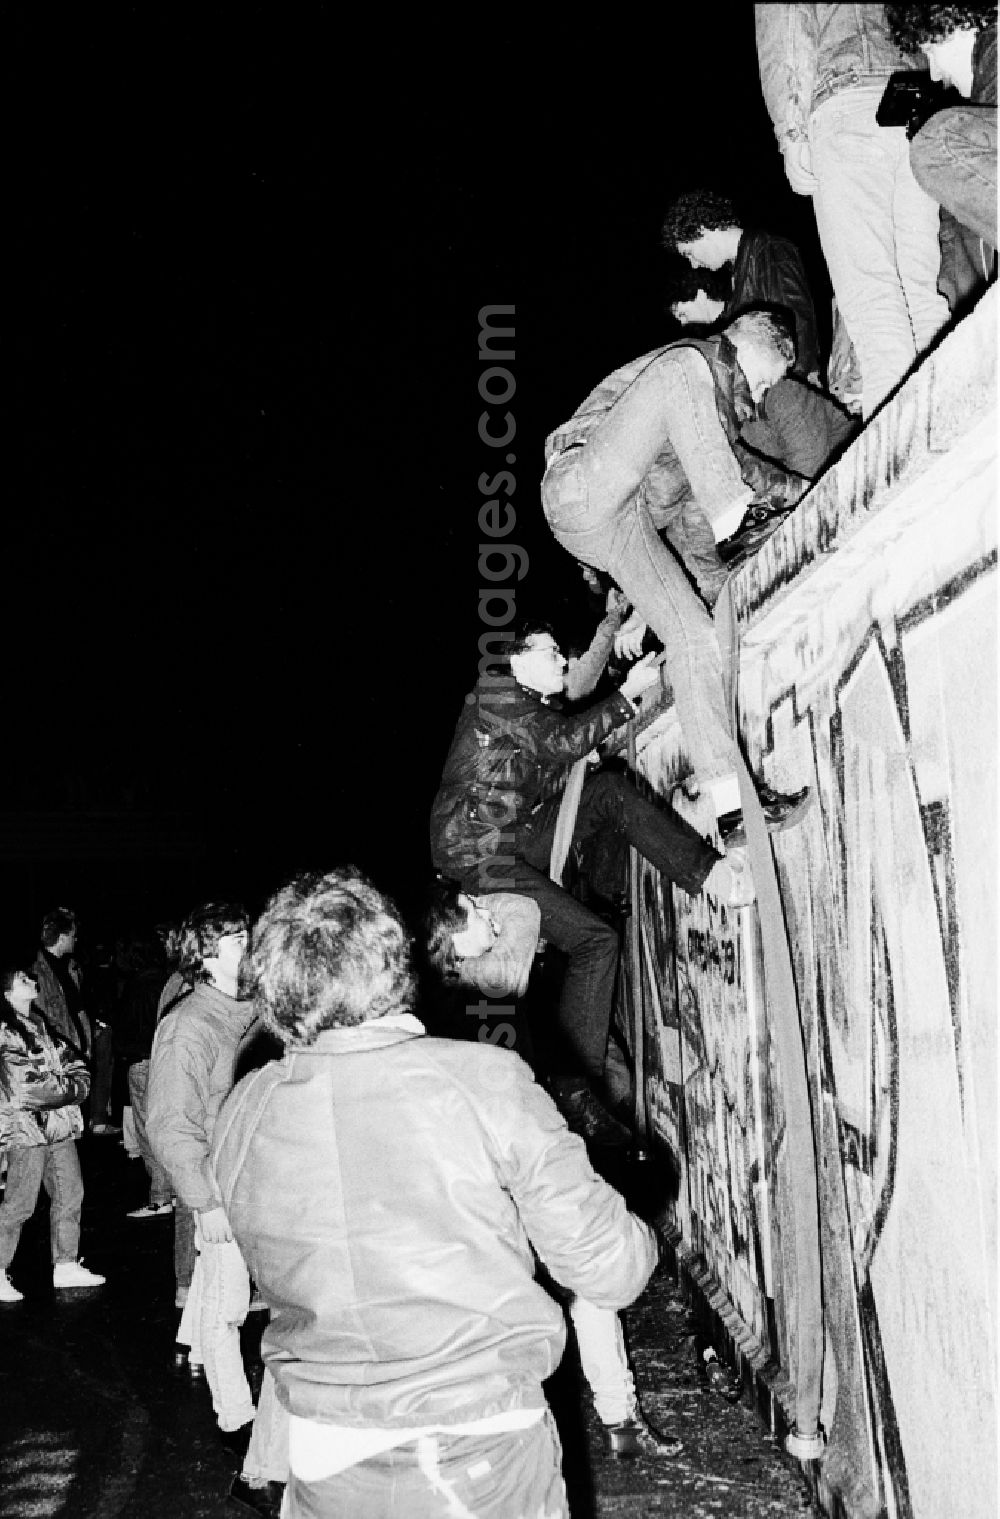 GDR picture archive: Berlin - Occupation of the tank wall at the front of the Brandenburg Gate in Berlin-Mitte. Several hundred people from West Berlin climbed and occupied the meter-high concrete barriers of the GDR border on the square in front of the Berlin landmark under the eyes of onlookers soldiers of the Border Troops of the GDR